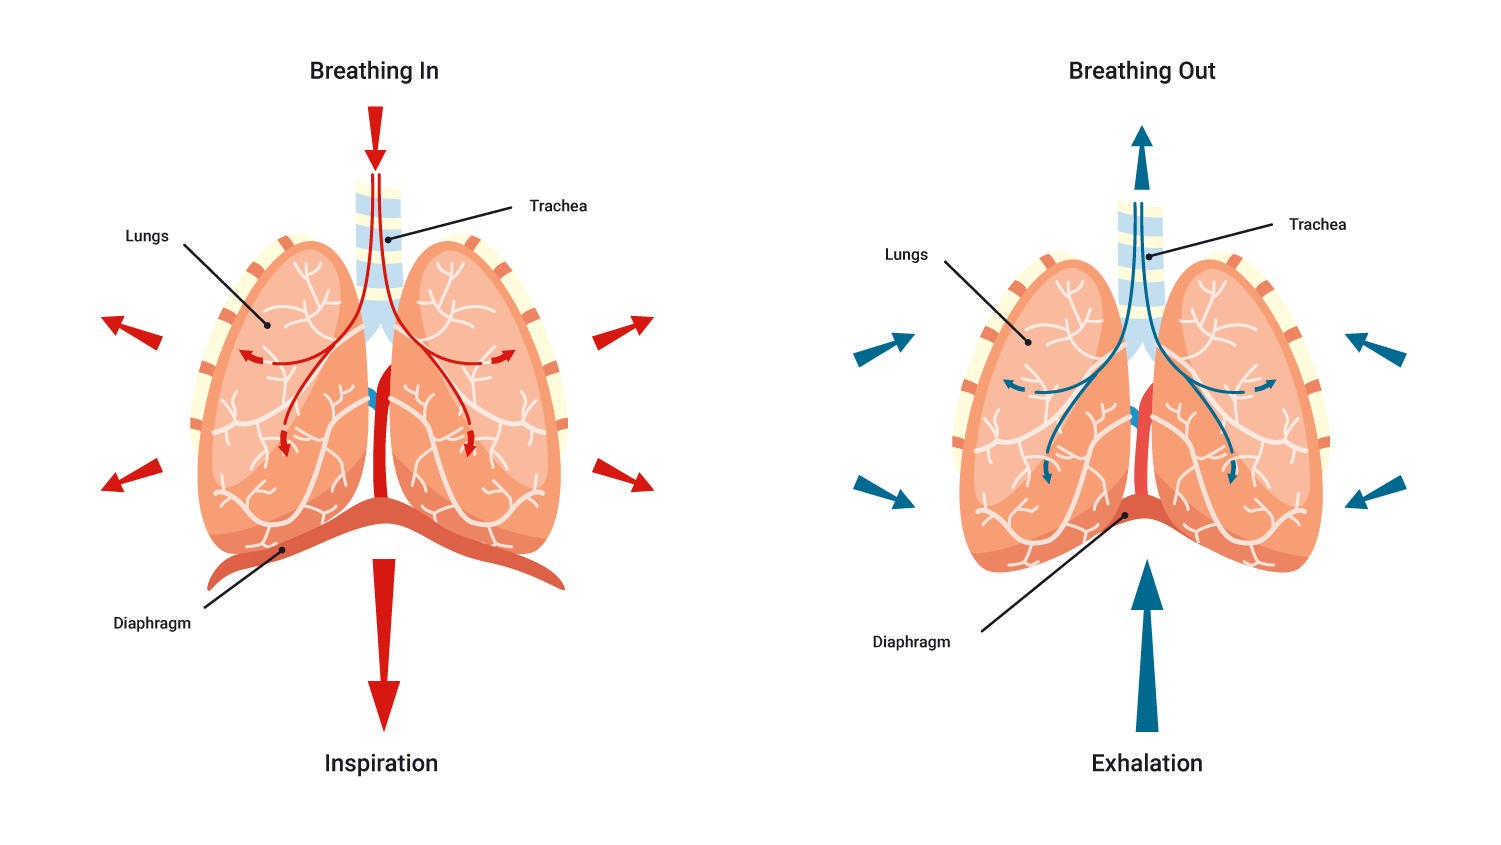 Image showing inhale and exhale movement